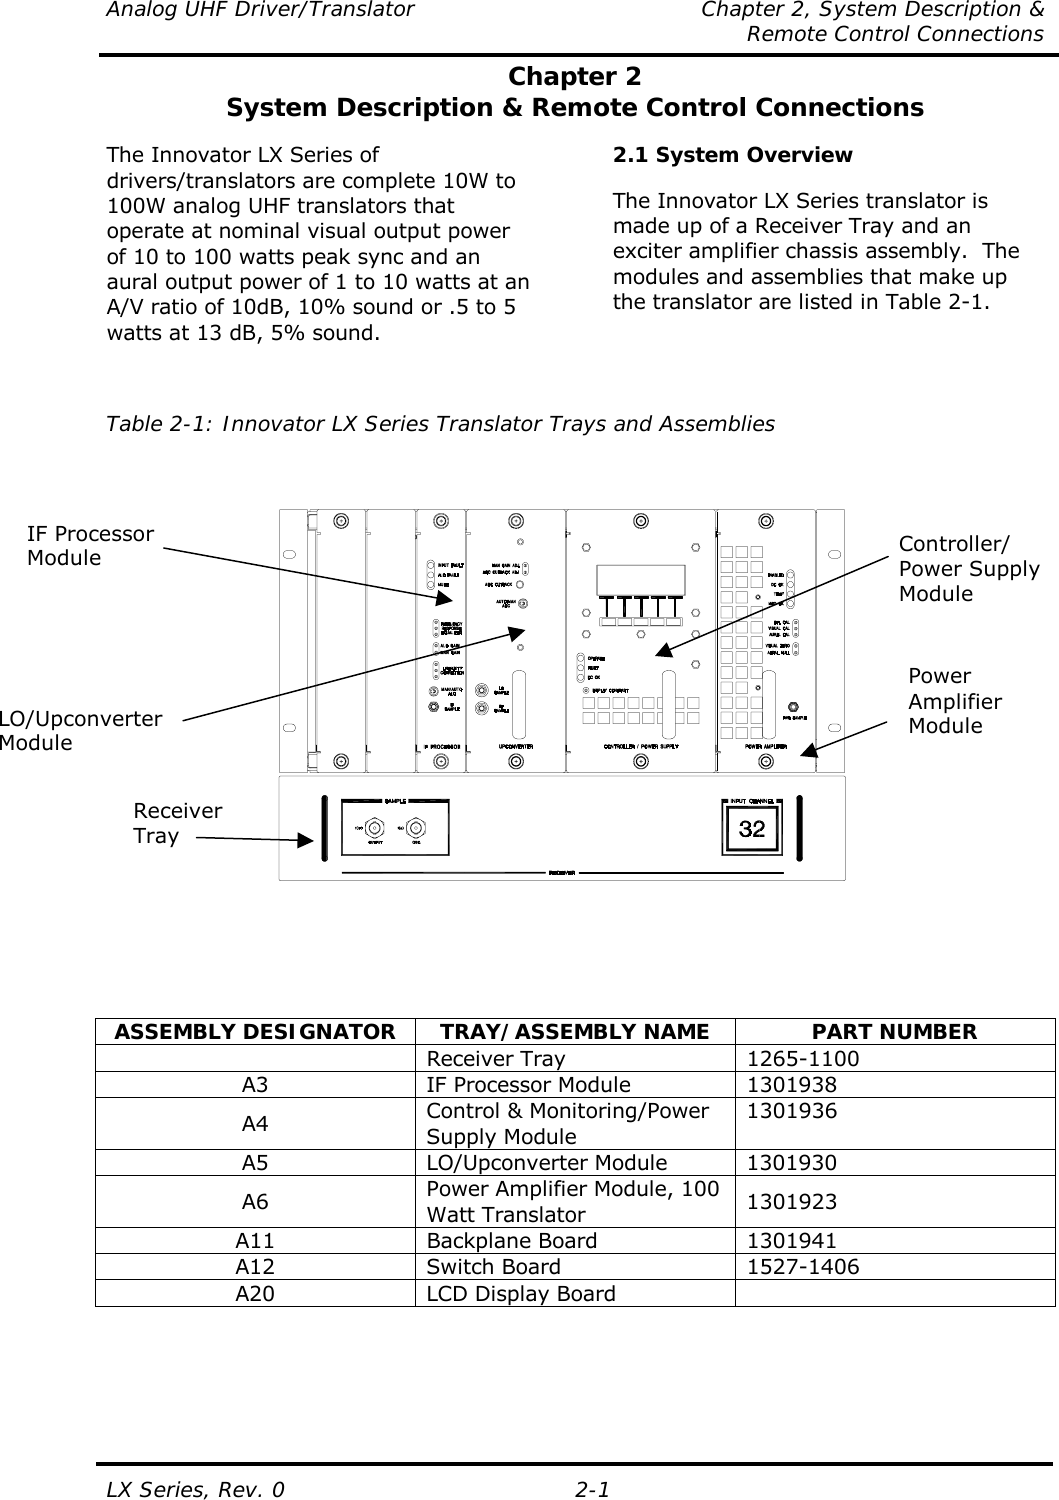 Analog UHF Driver/Translator  Chapter 2, System Description &amp;   Remote Control Connections LX Series, Rev. 0  2-1 IF Processor Module LO/Upconverter Module Chapter 2 System Description &amp; Remote Control Connections  The Innovator LX Series of drivers/translators are complete 10W to 100W analog UHF translators that operate at nominal visual output power of 10 to 100 watts peak sync and an aural output power of 1 to 10 watts at an A/V ratio of 10dB, 10% sound or .5 to 5 watts at 13 dB, 5% sound.   2.1 System Overview  The Innovator LX Series translator is made up of a Receiver Tray and an exciter amplifier chassis assembly.  The modules and assemblies that make up the translator are listed in Table 2-1.   Table 2-1: Innovator LX Series Translator Trays and Assemblies                  ASSEMBLY DESIGNATOR  TRAY/ASSEMBLY NAME  PART NUMBER  Receiver Tray  1265-1100 A3  IF Processor Module  1301938 A4  Control &amp; Monitoring/Power Supply Module 1301936 A5 LO/Upconverter Module 1301930 A6  Power Amplifier Module, 100 Watt Translator  1301923 A11 Backplane Board 1301941 A12 Switch Board  1527-1406 A20  LCD Display Board          Receiver Tray Controller/ Power SupplyModulePower AmplifierModule 